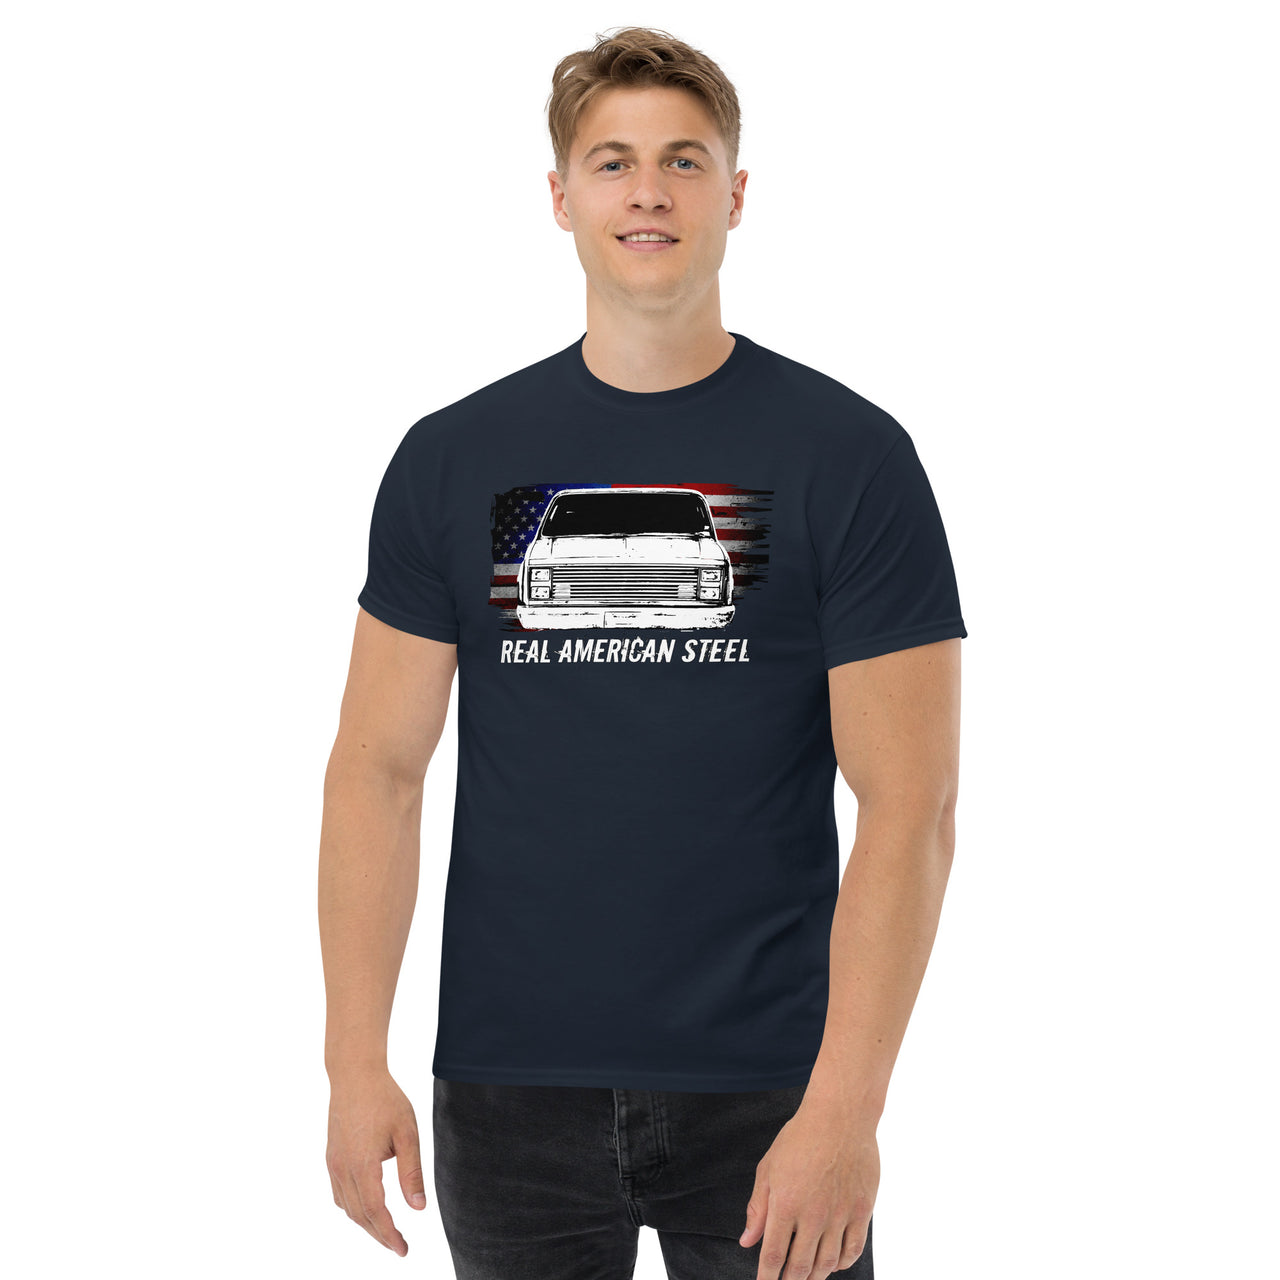 C10 Square Body T-Shirt modeled in navy